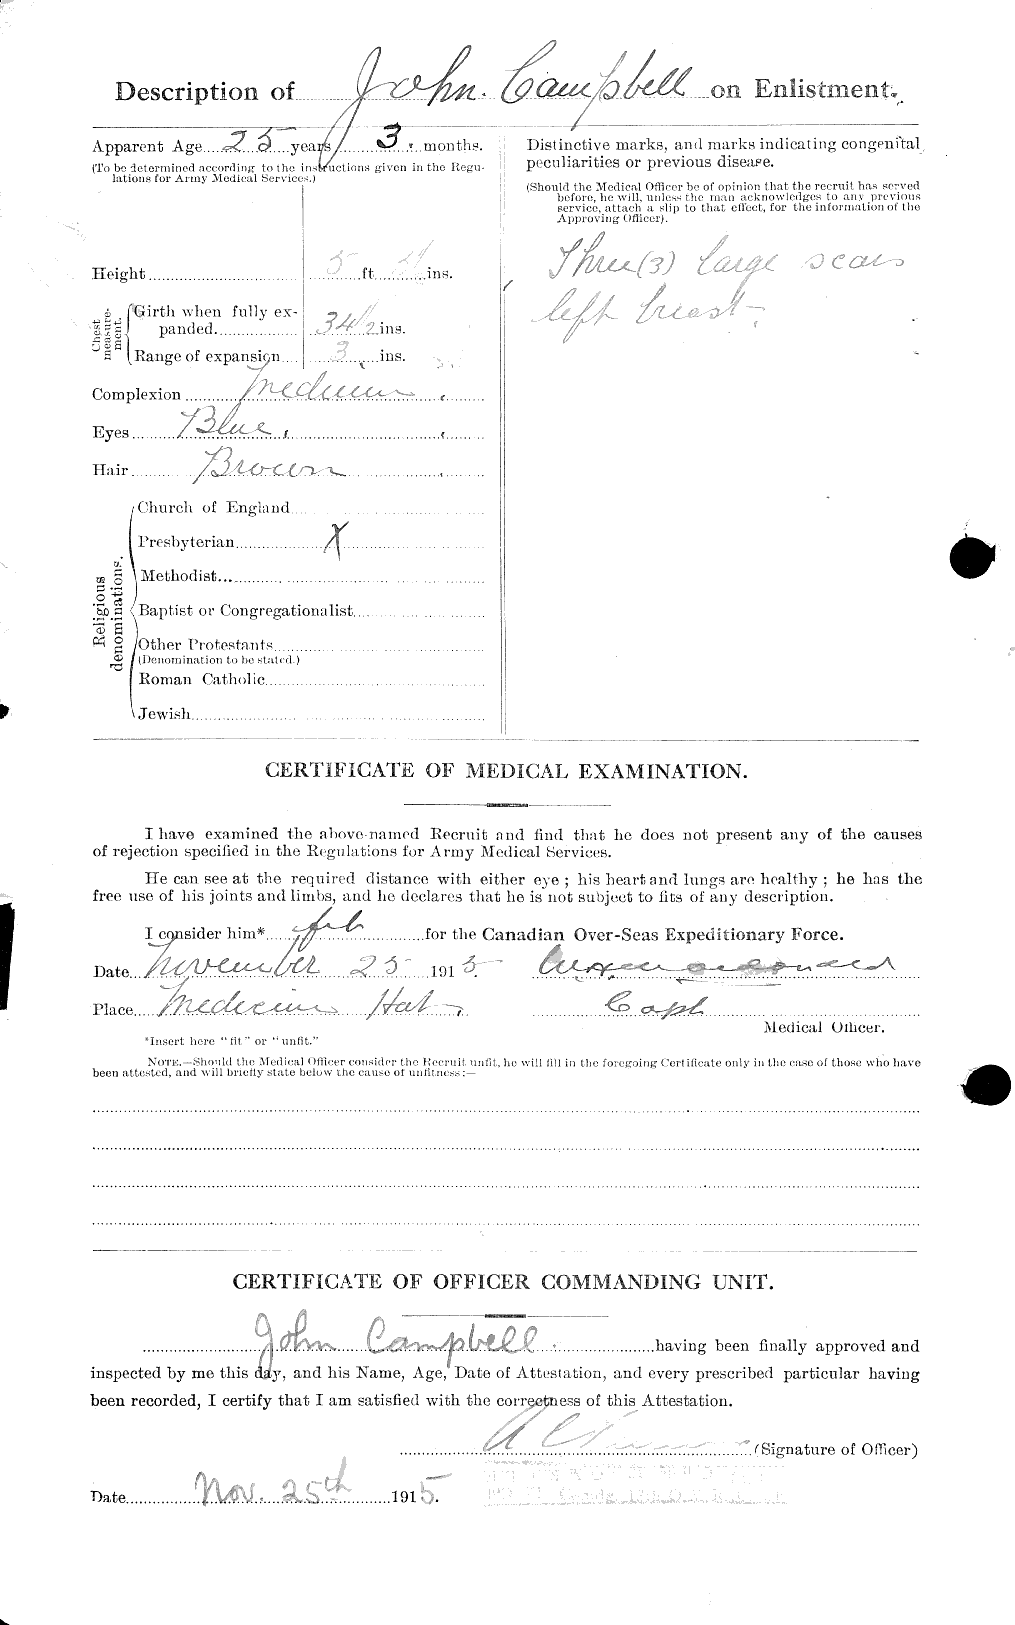 Personnel Records of the First World War - CEF 008454b